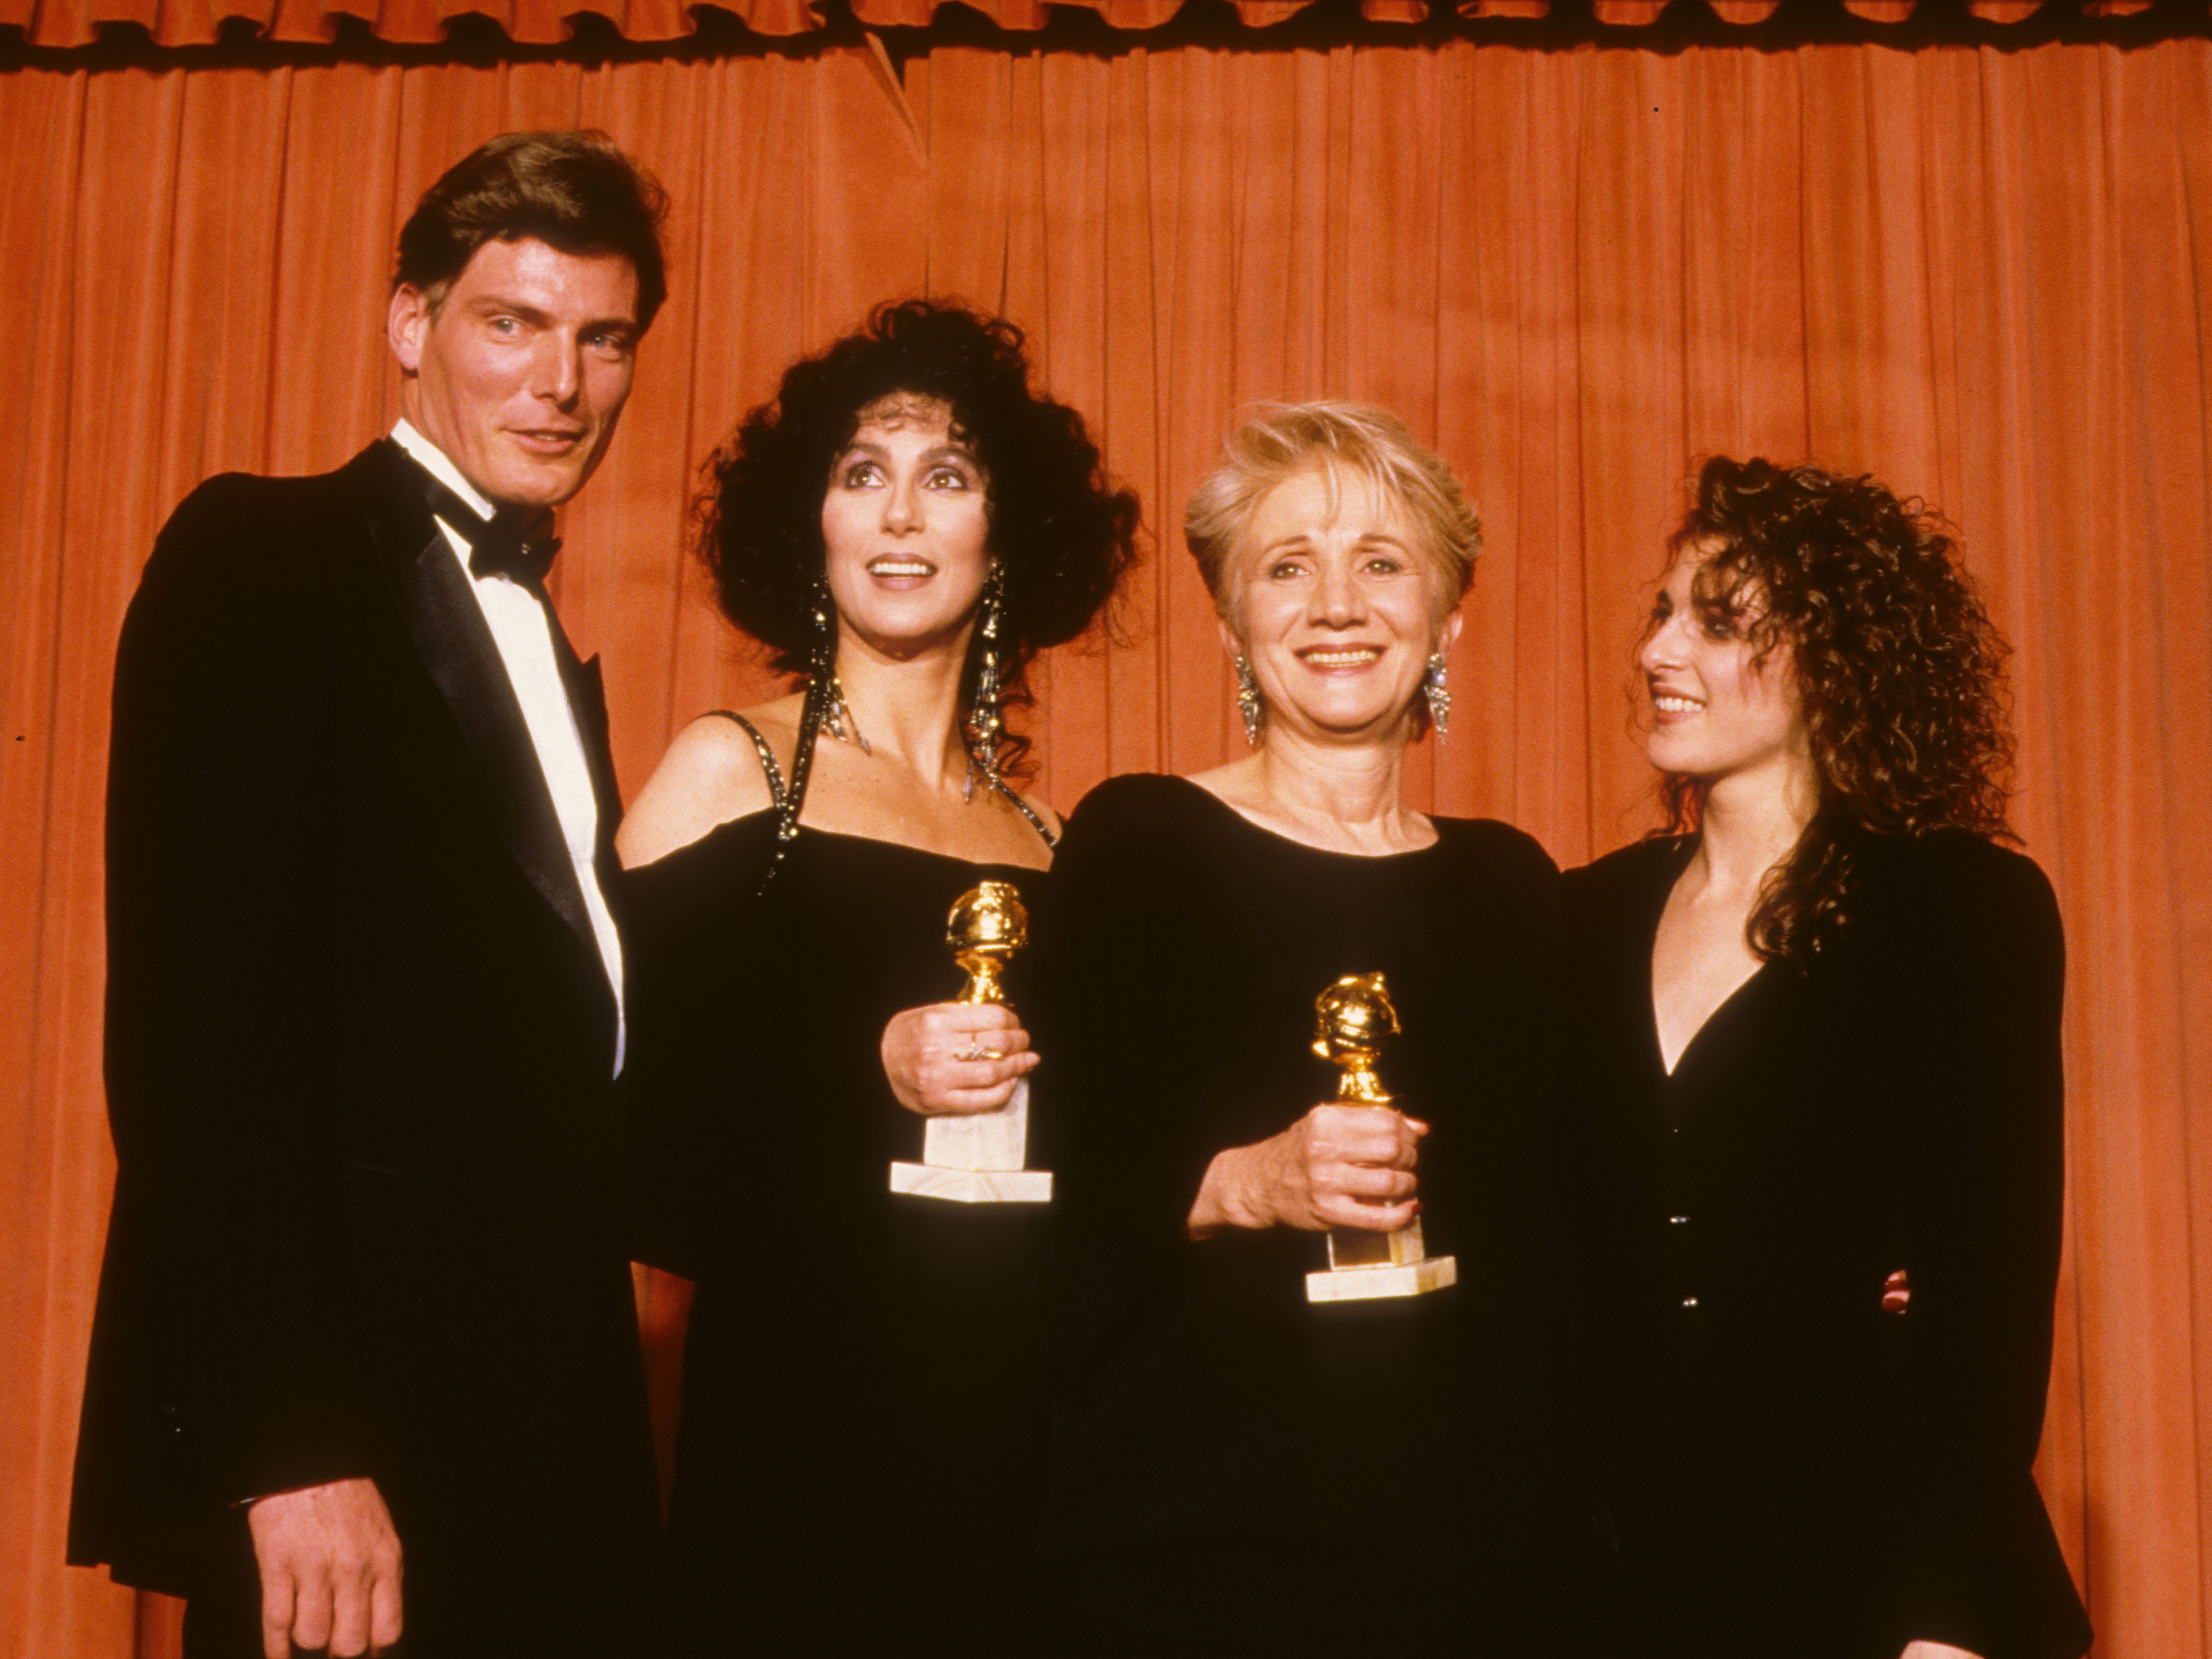 1988 Christopher Reeve, Cher, Olympia Dukakis, and, Marlee Matlin, 45th Golden Globes